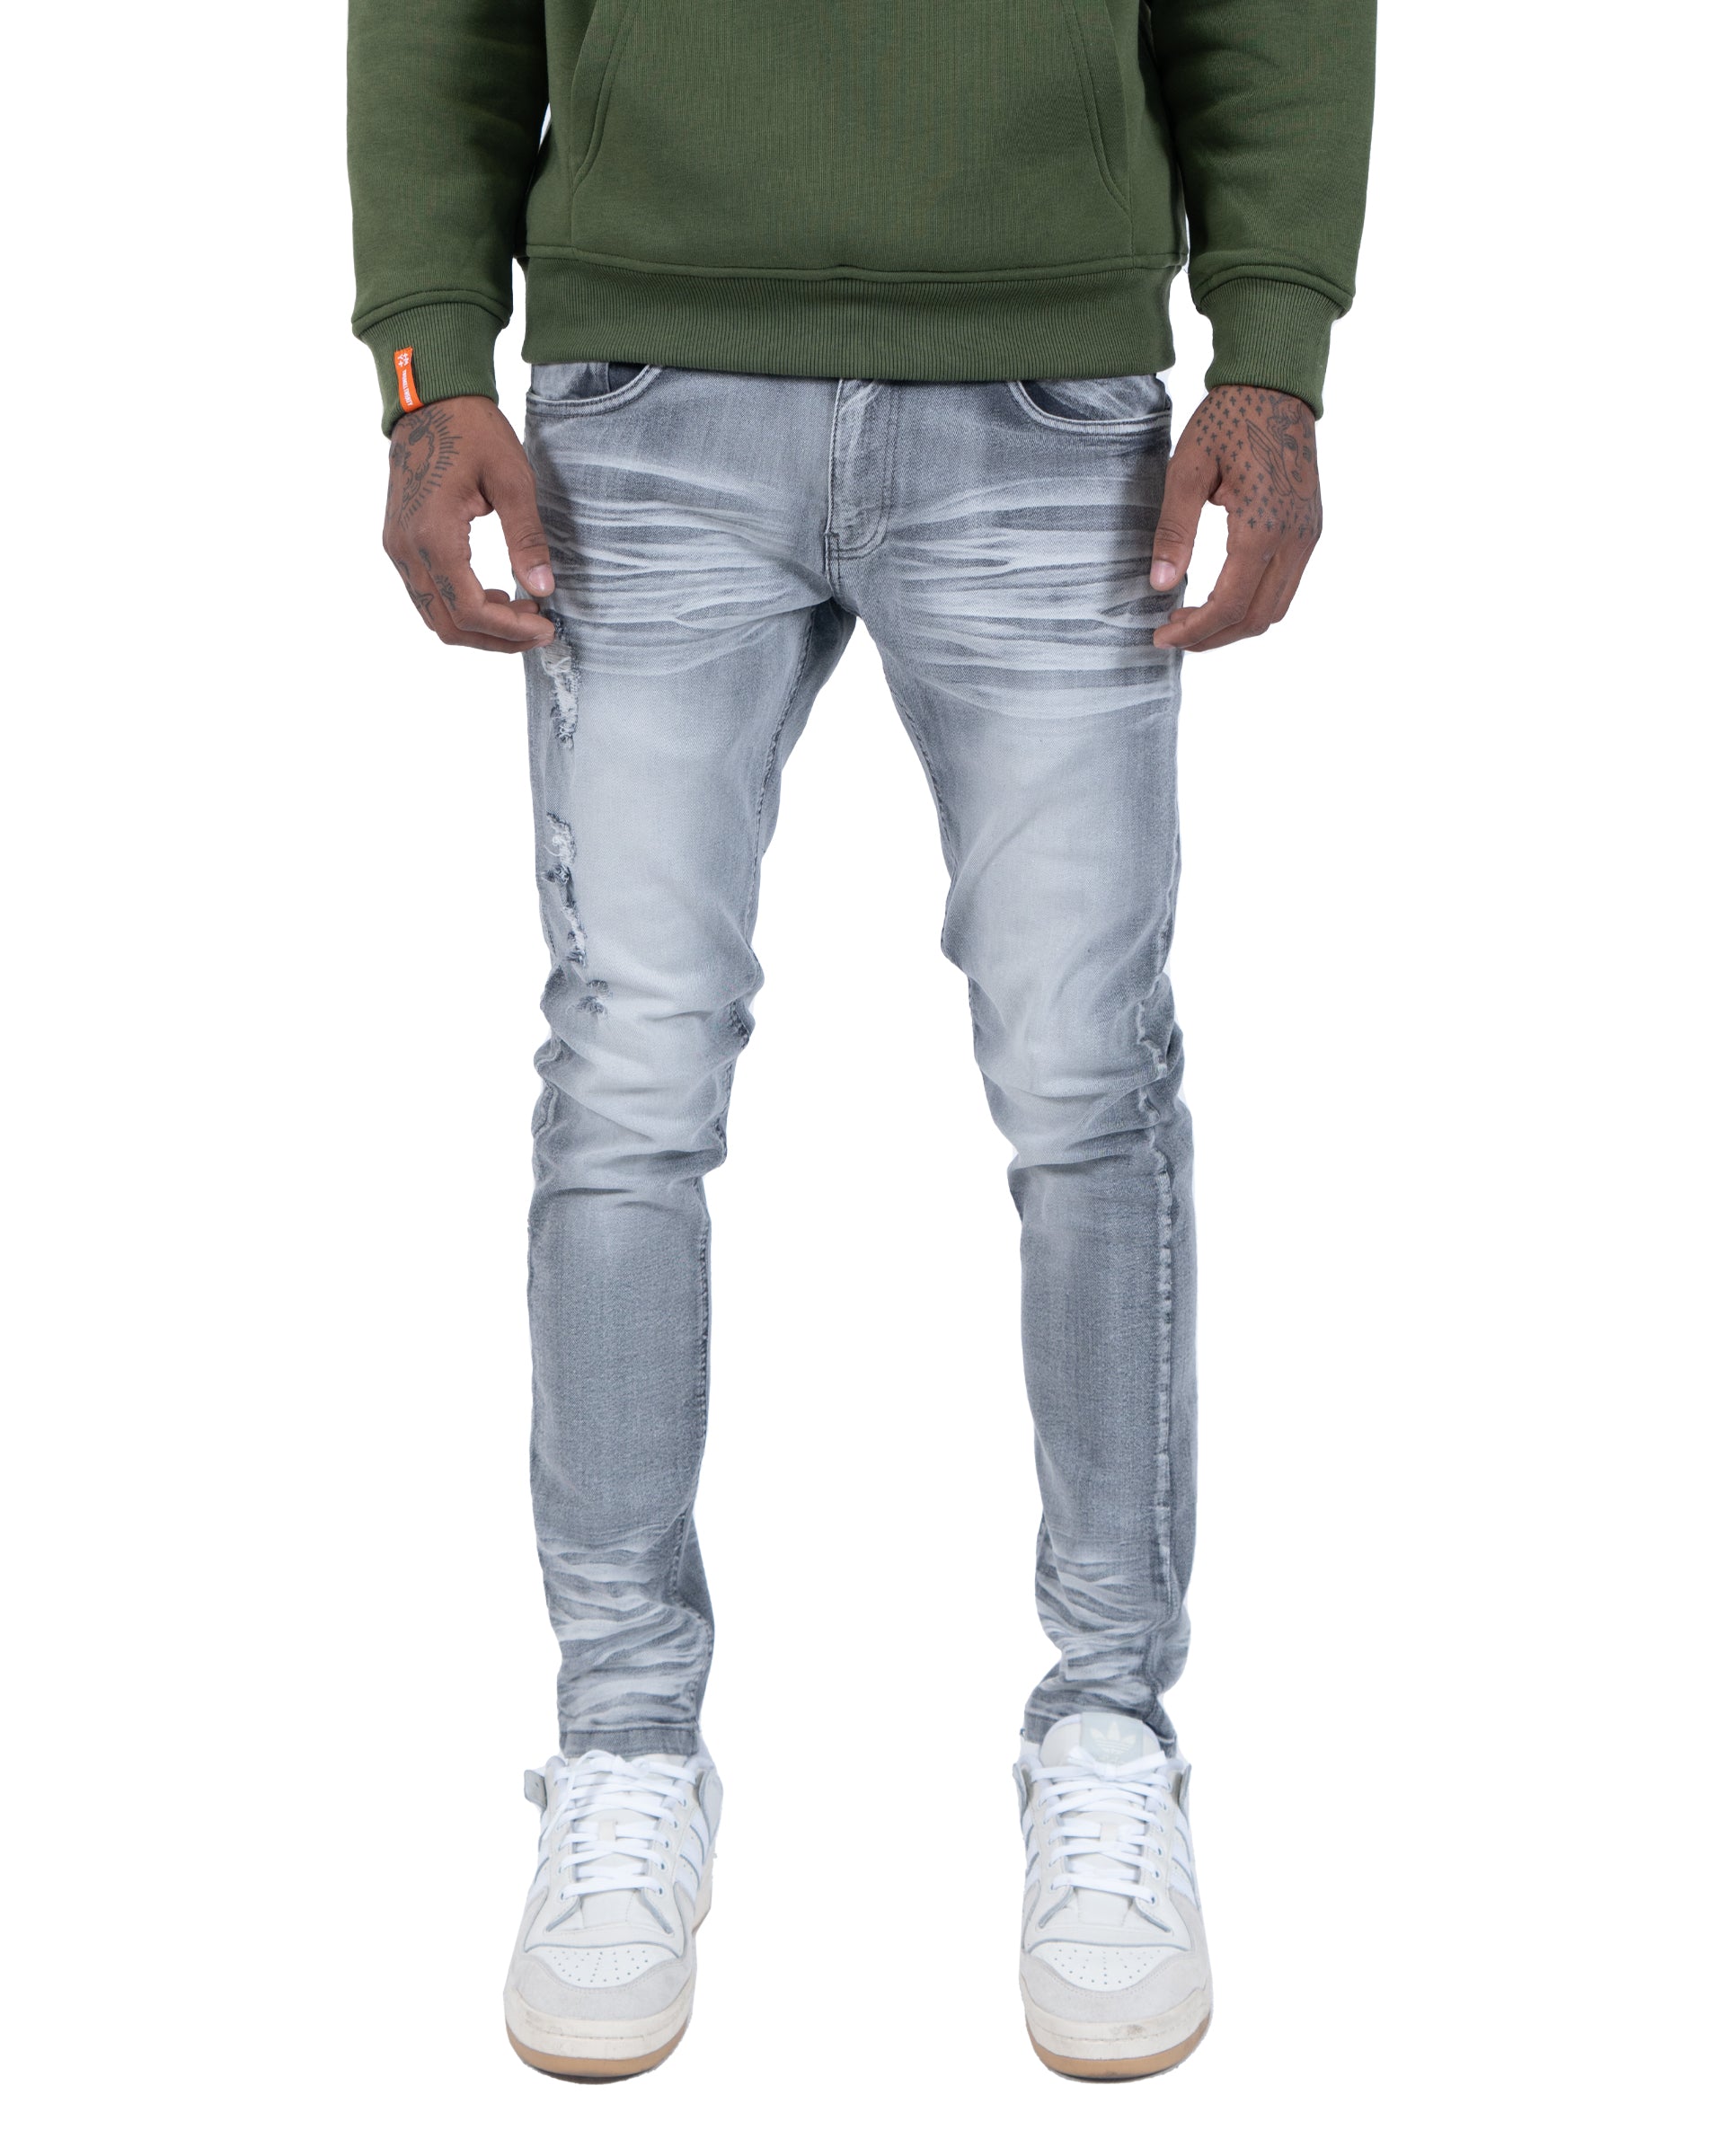 AUGUSTA | Distressed Skinny Jeans in Gray Wash